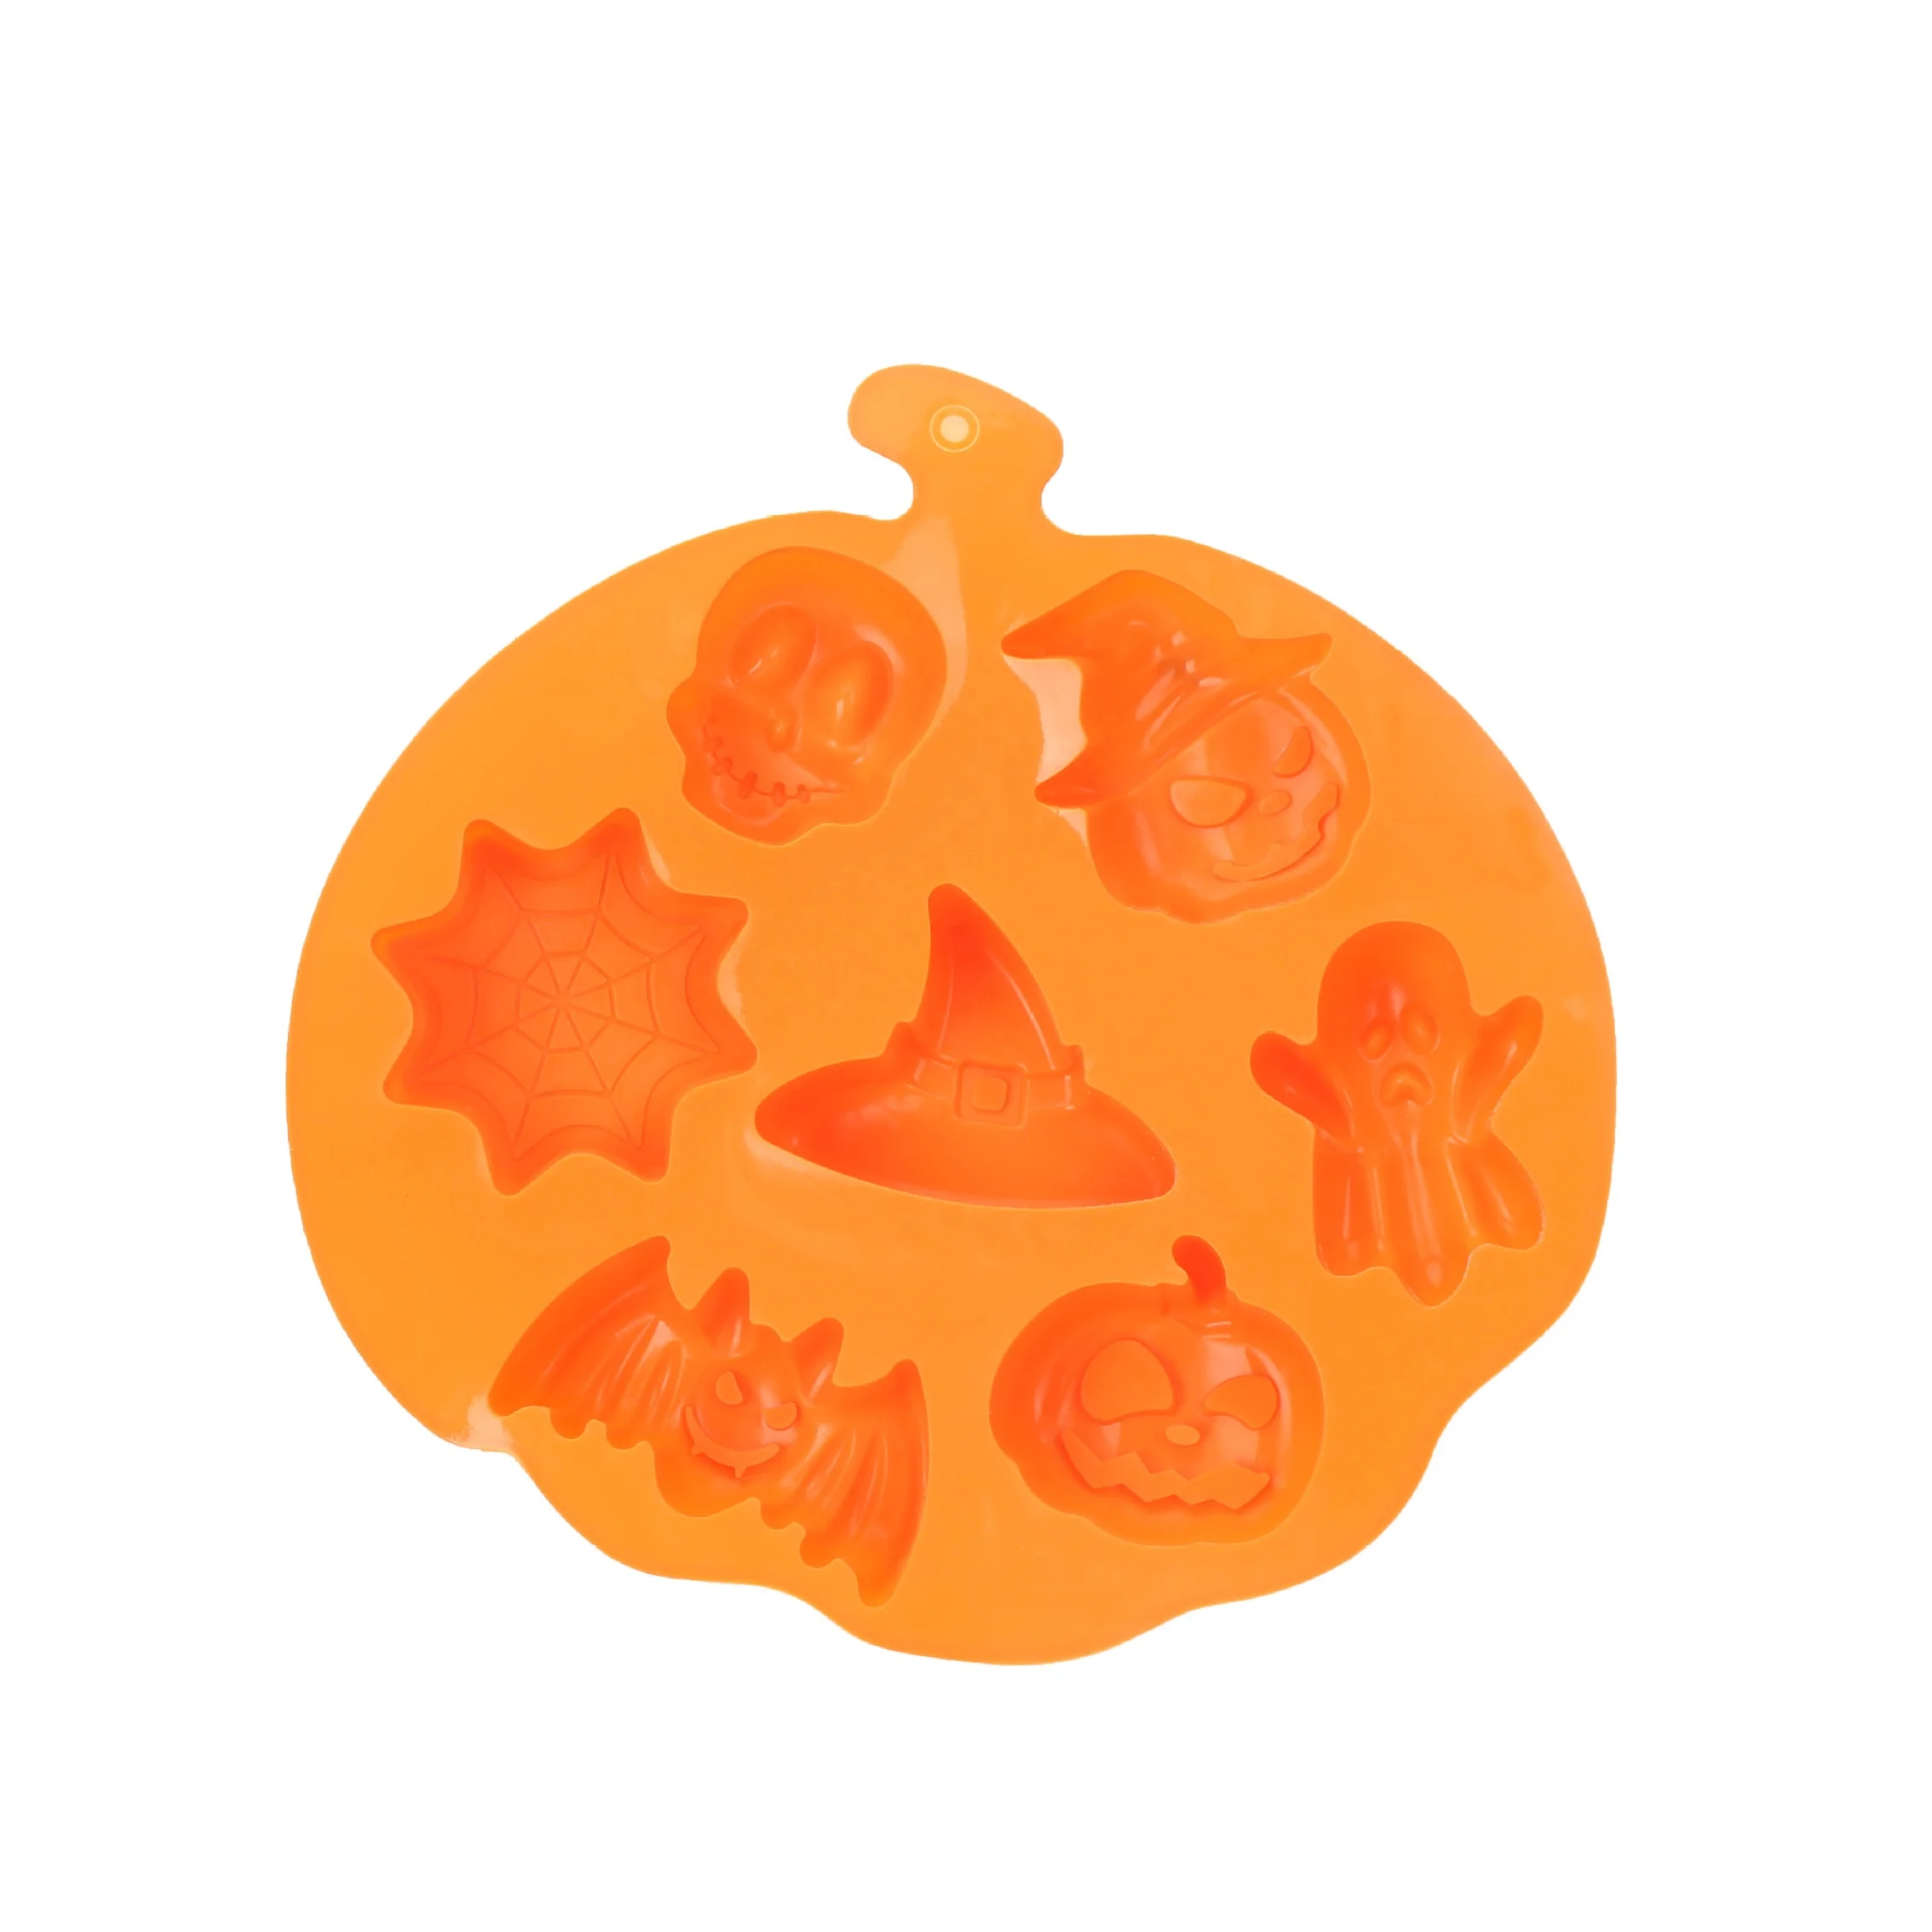 Hot Selling Halloween Pastry Fondant Chocolate Pumpkin Ghost Cake Silicone Moulds Soap Candle Making Mold Baking Tools